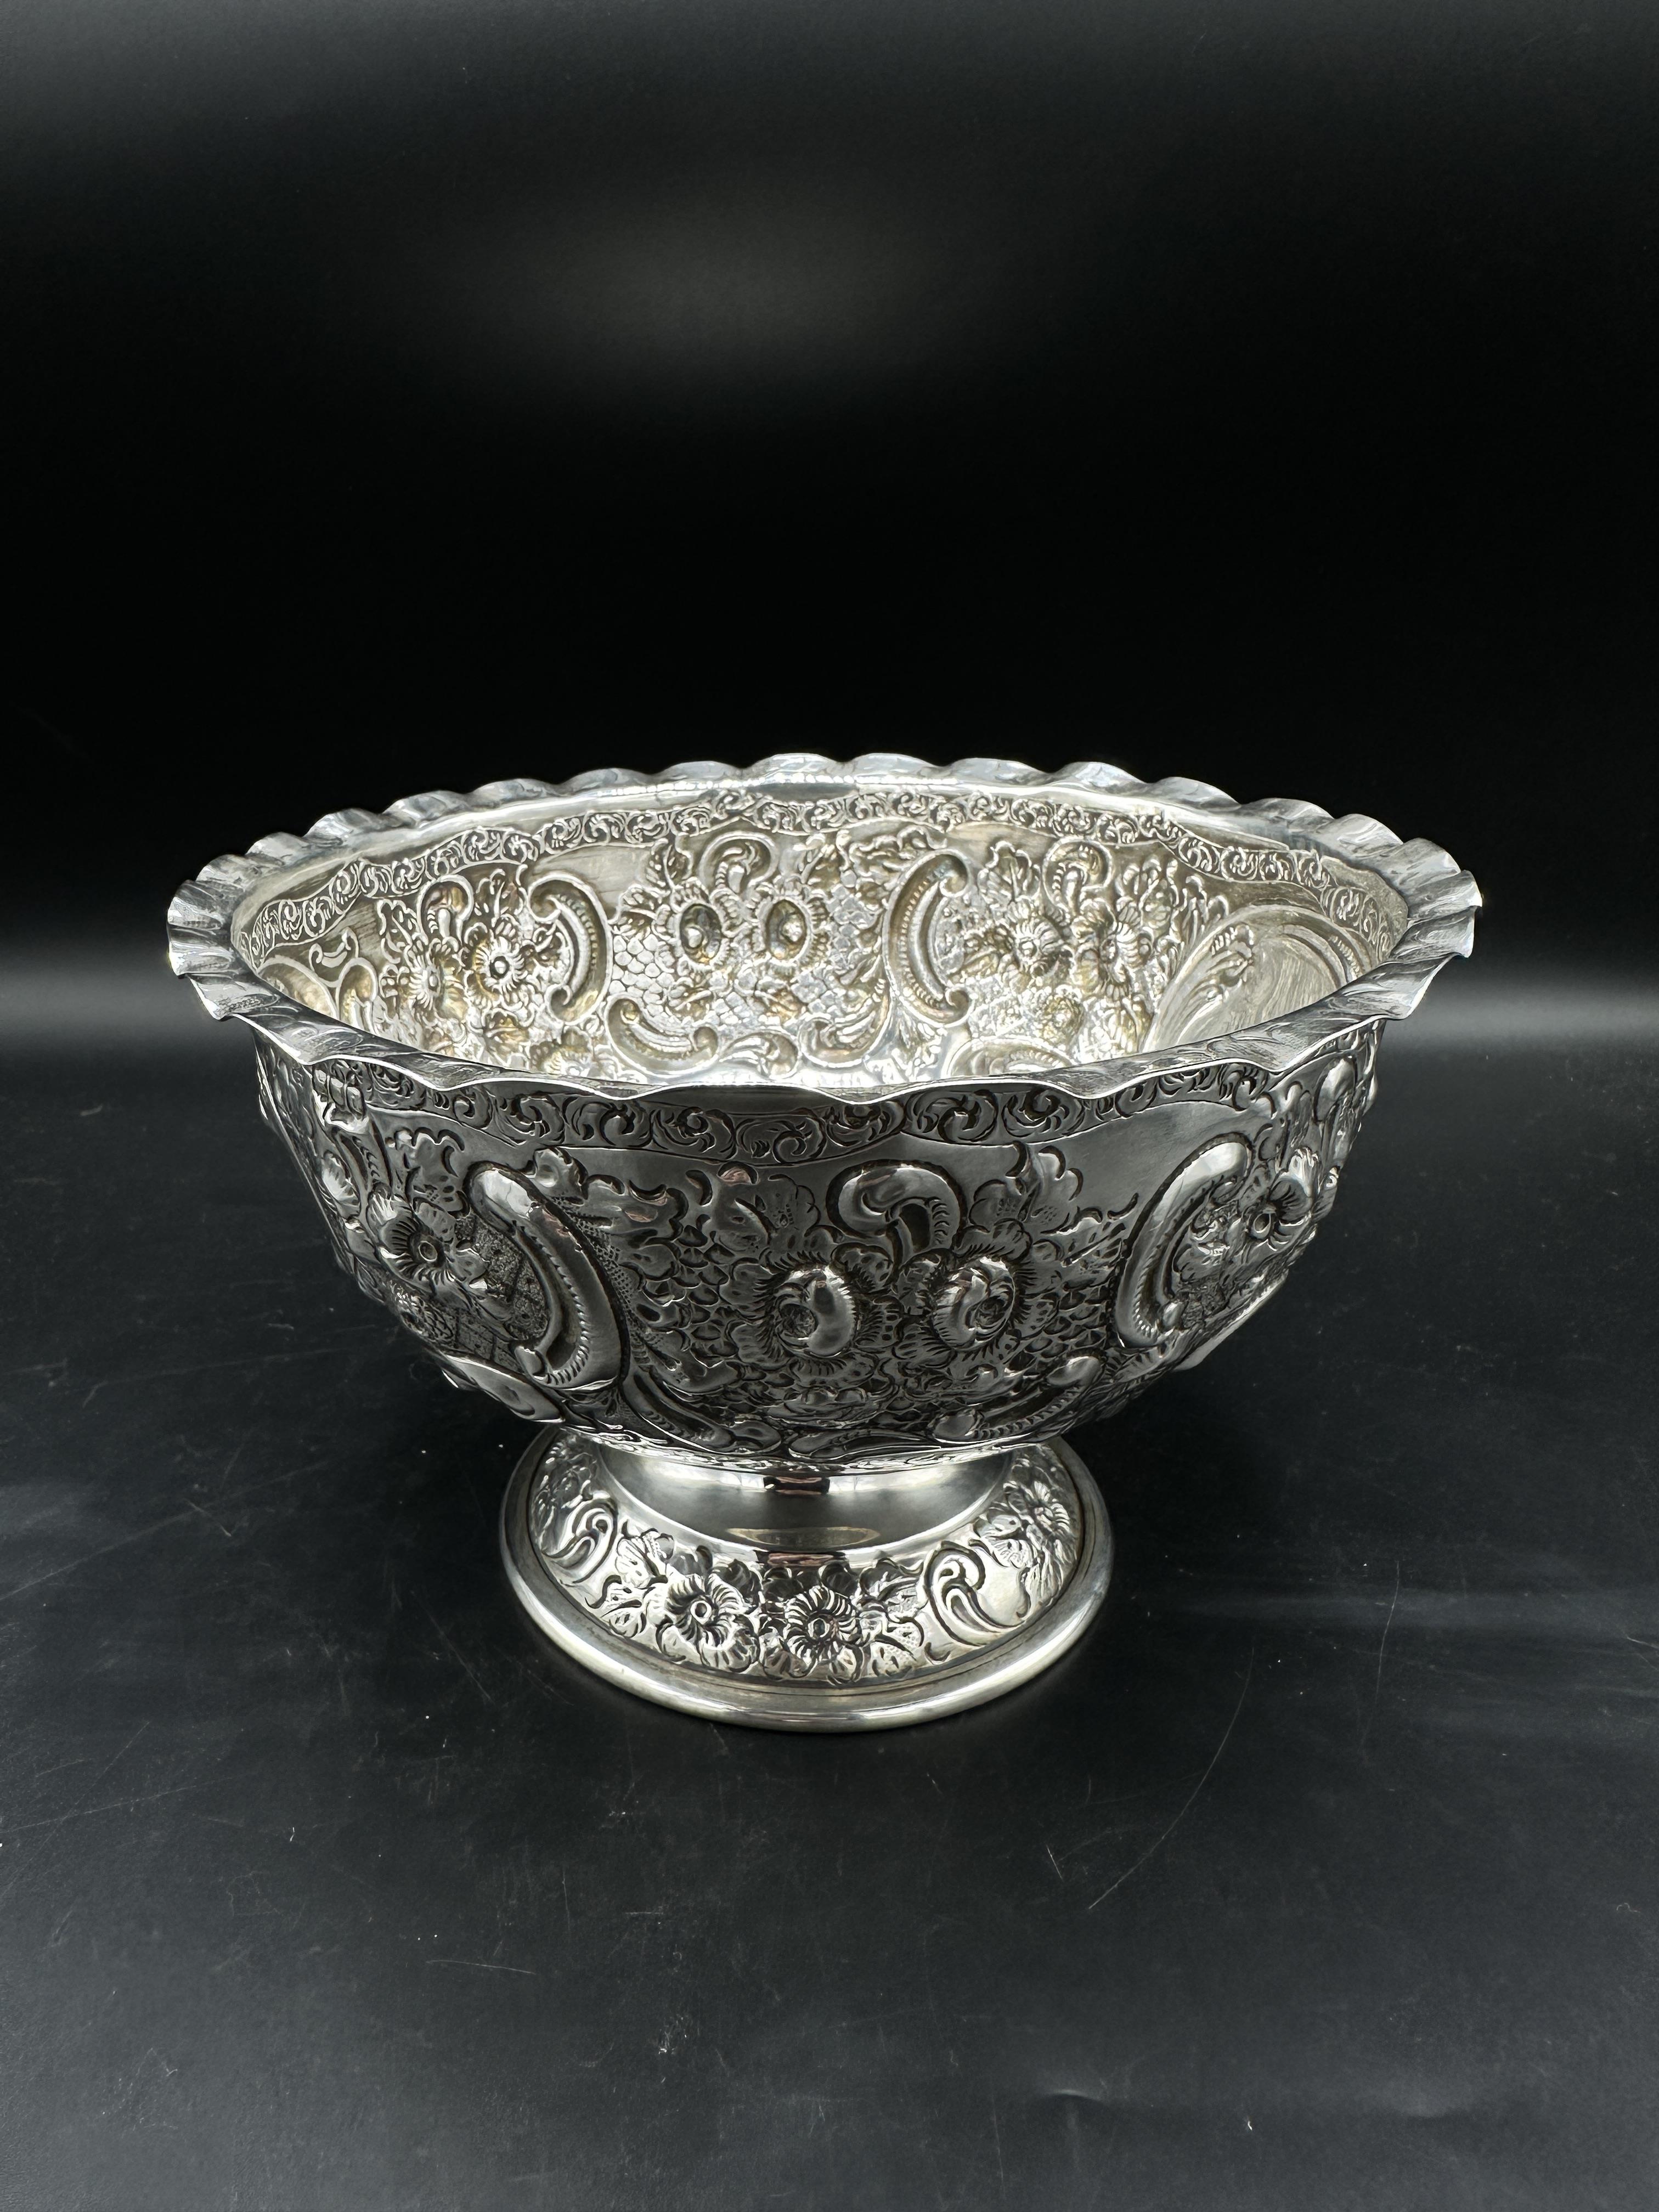 Silver repousse bowl - Image 2 of 5